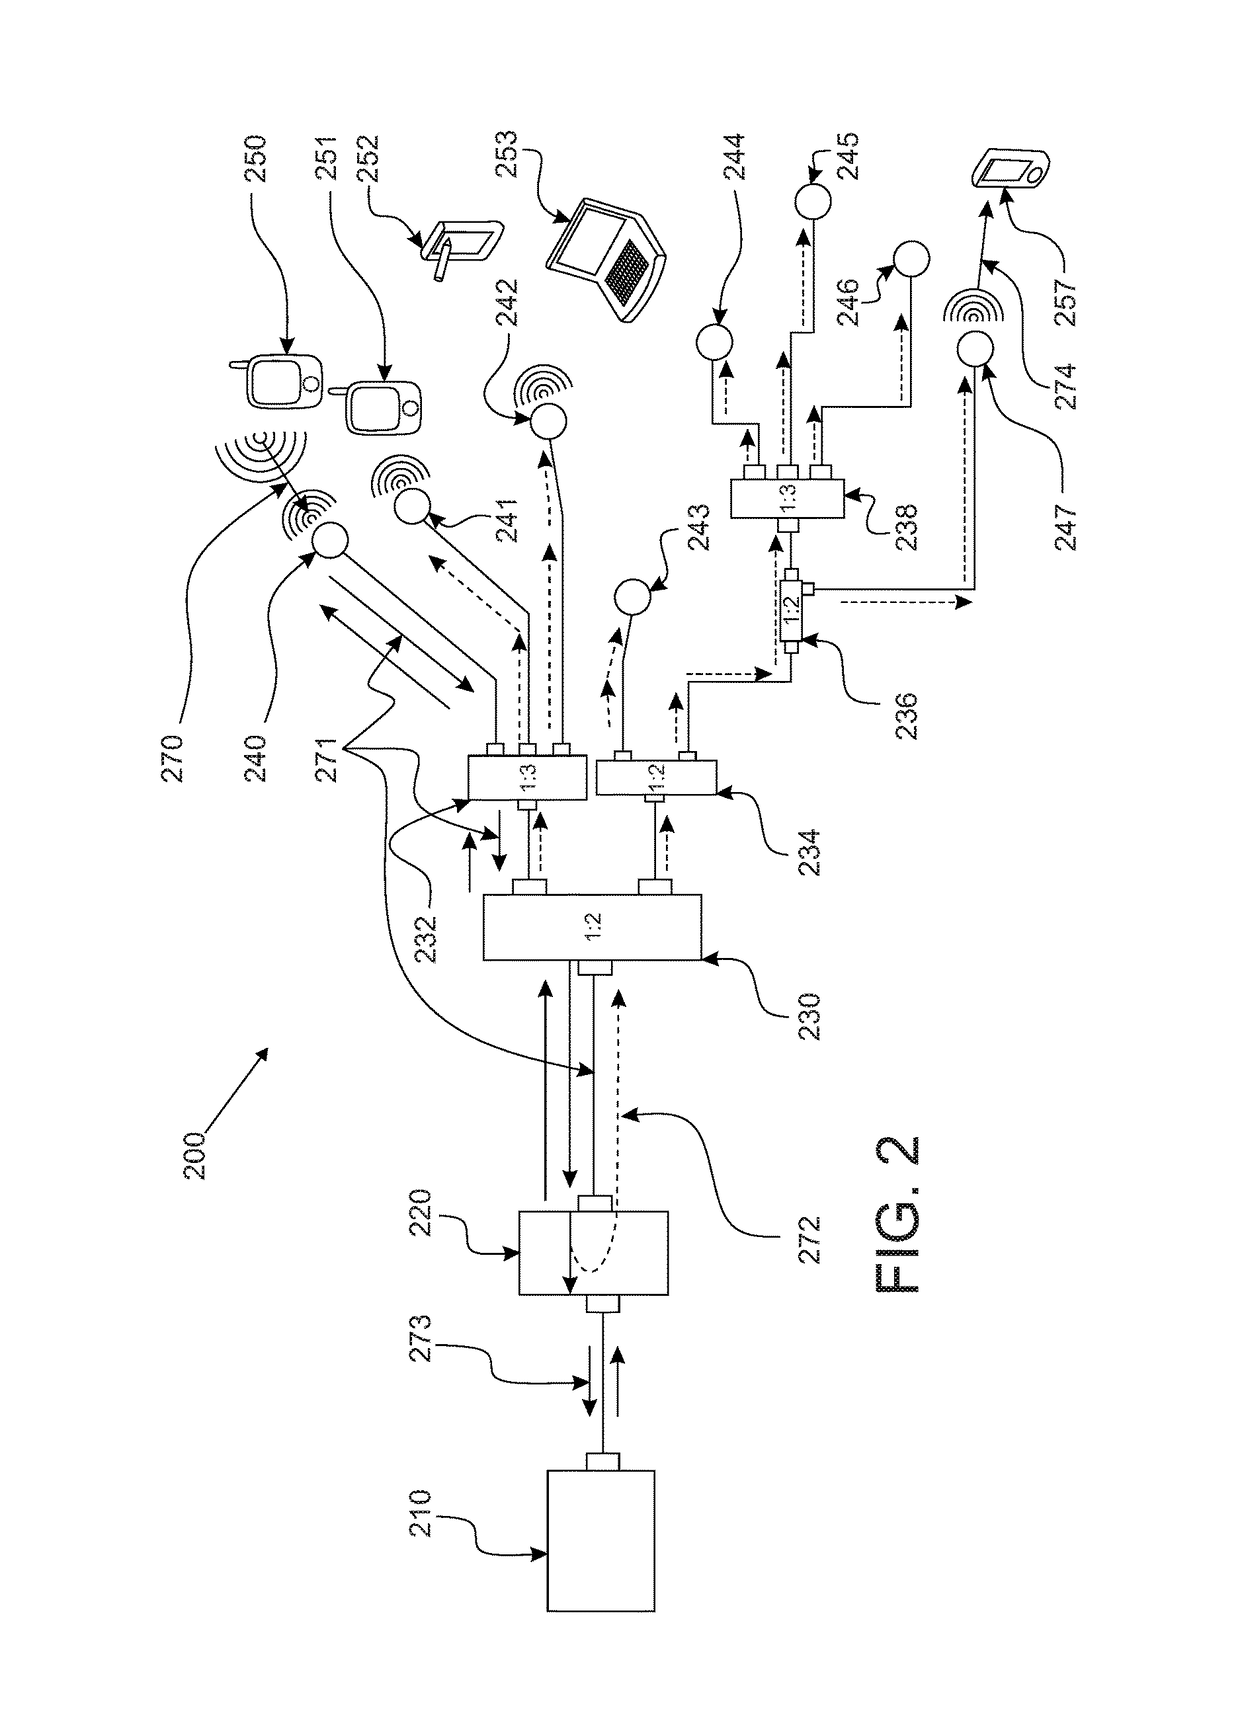 Method and system for managing a wireless network comprising a distributed antenna system (DAS)